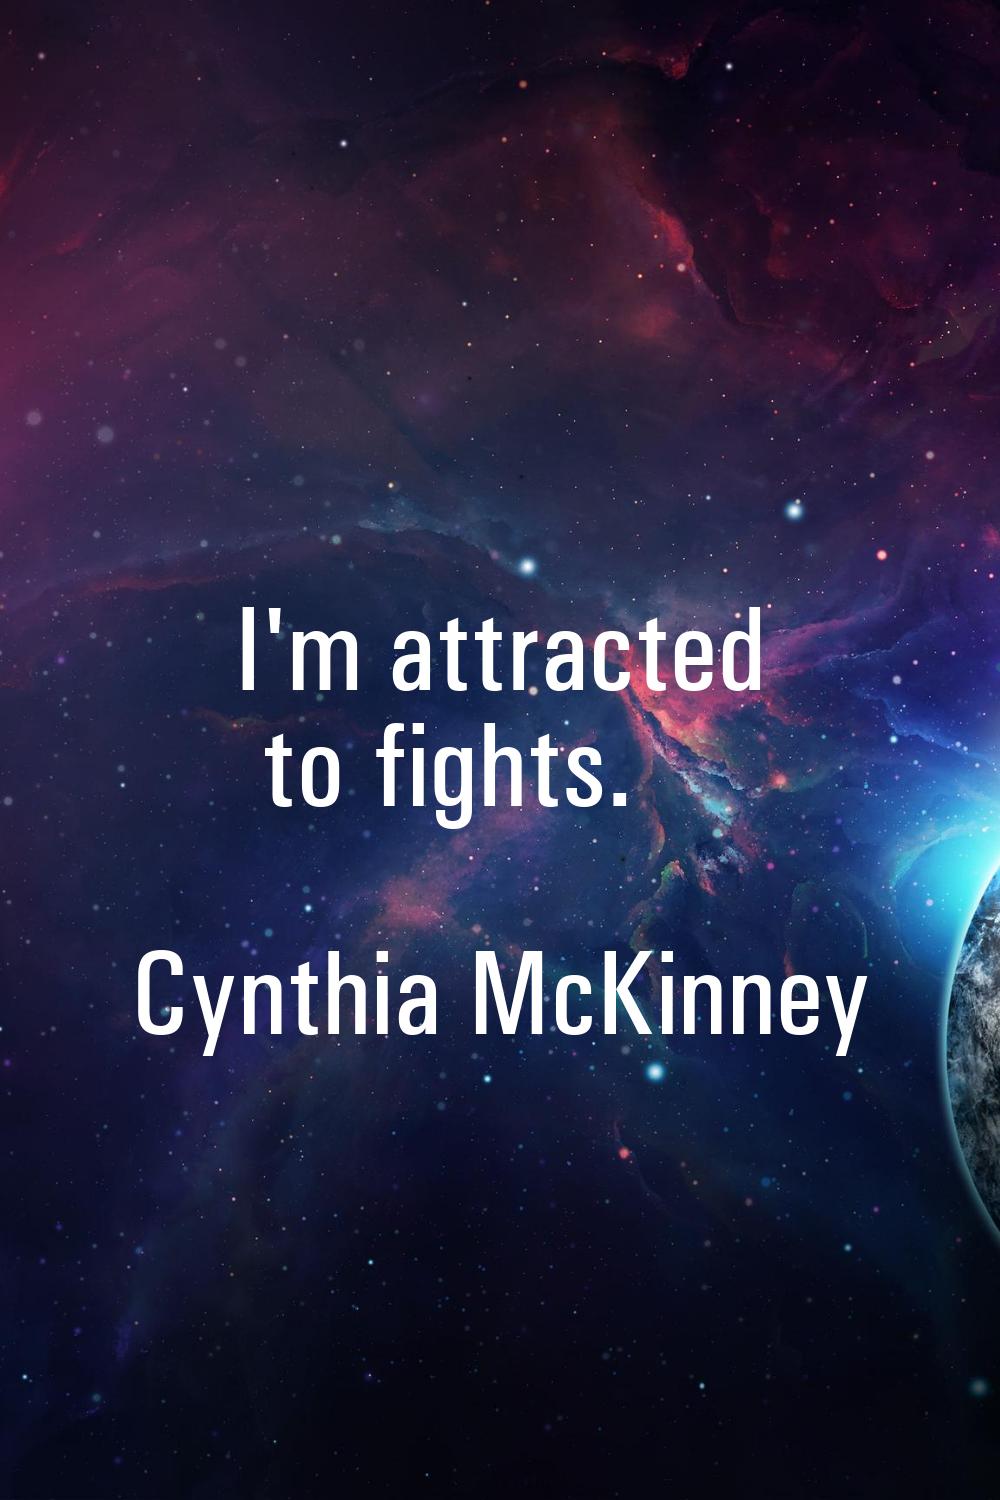 I'm attracted to fights.